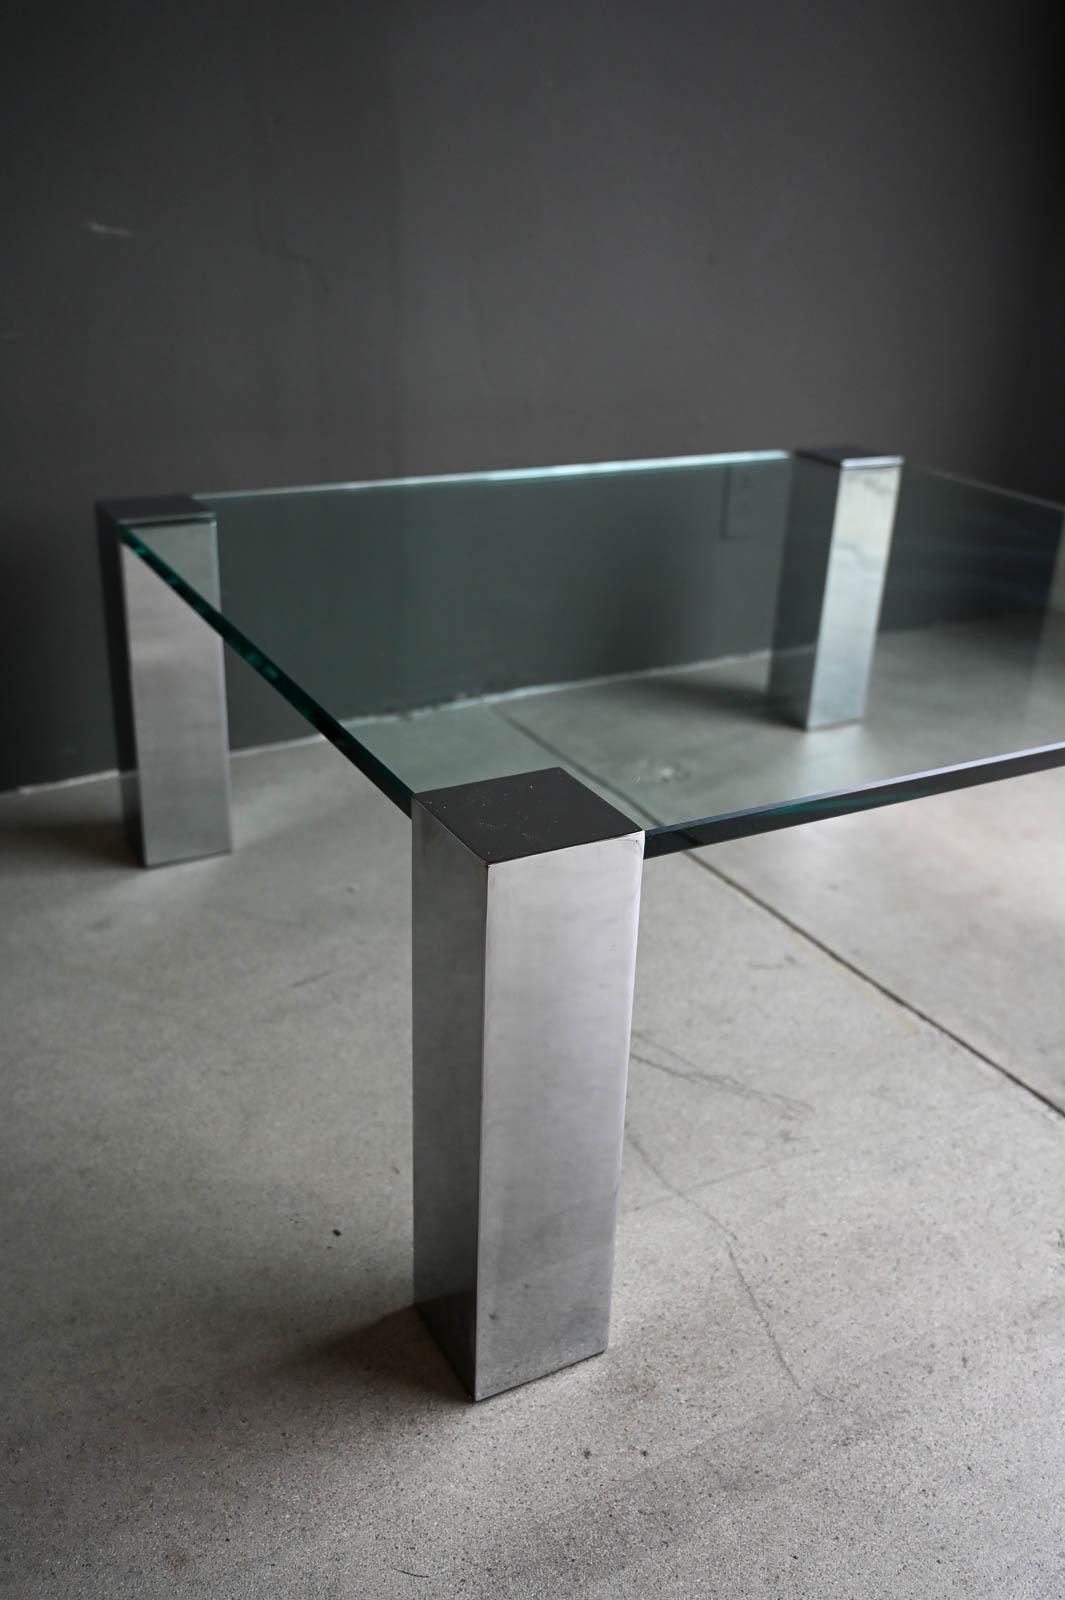 Late 20th Century Chrome and Glass Coffee Table by Willy Rizzo for Cidue, Italy ca. 1970 For Sale